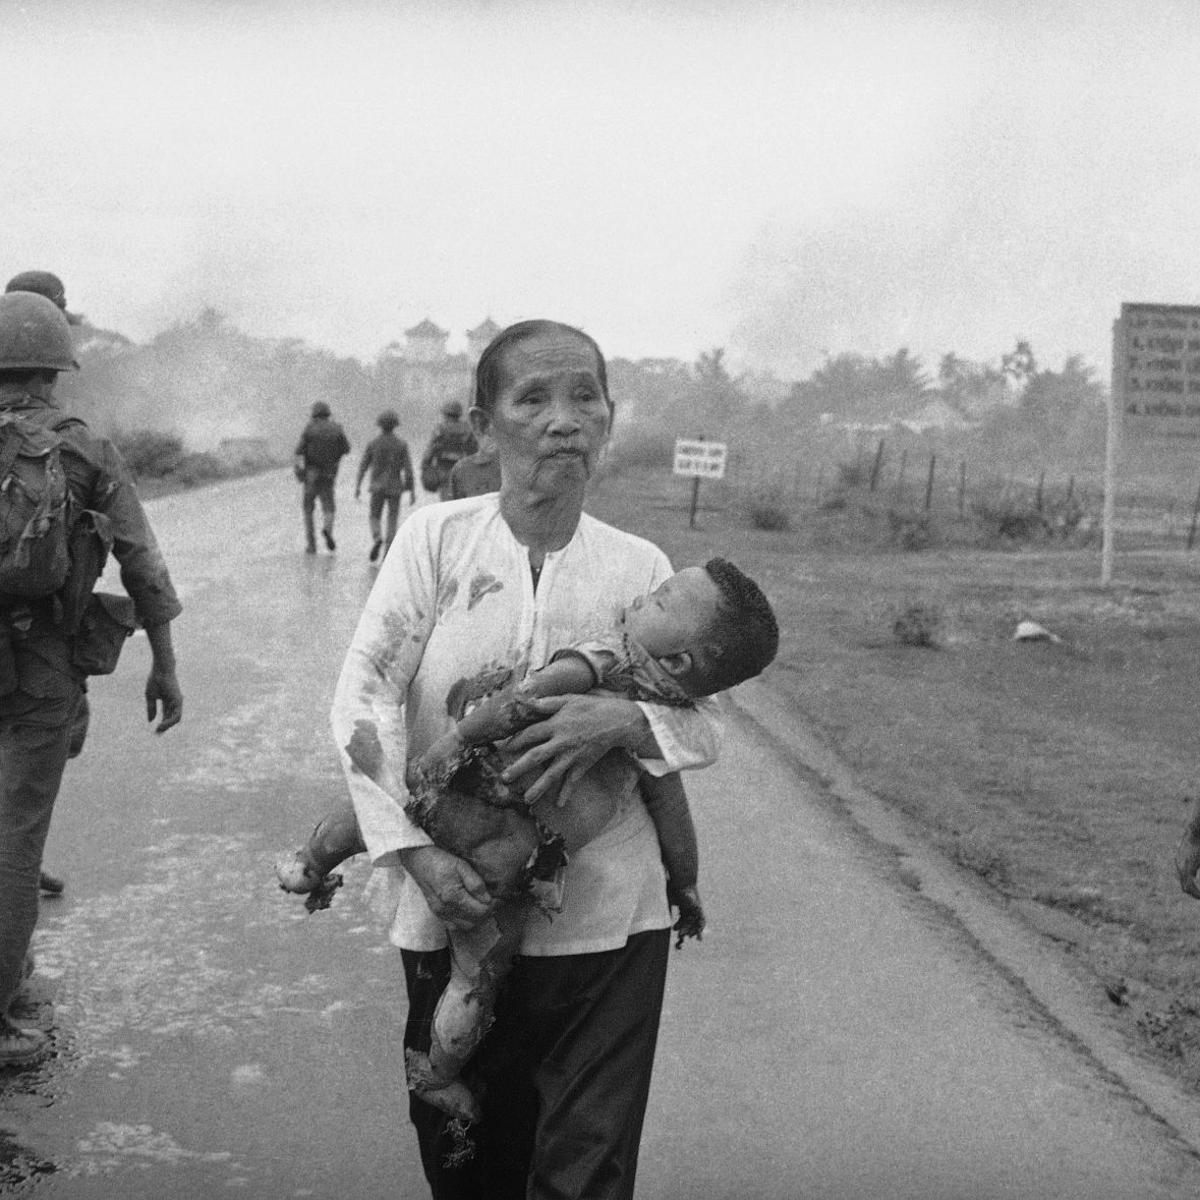 Photos: Iconic images from the Vietnam War era | | hanfordsentinel.com